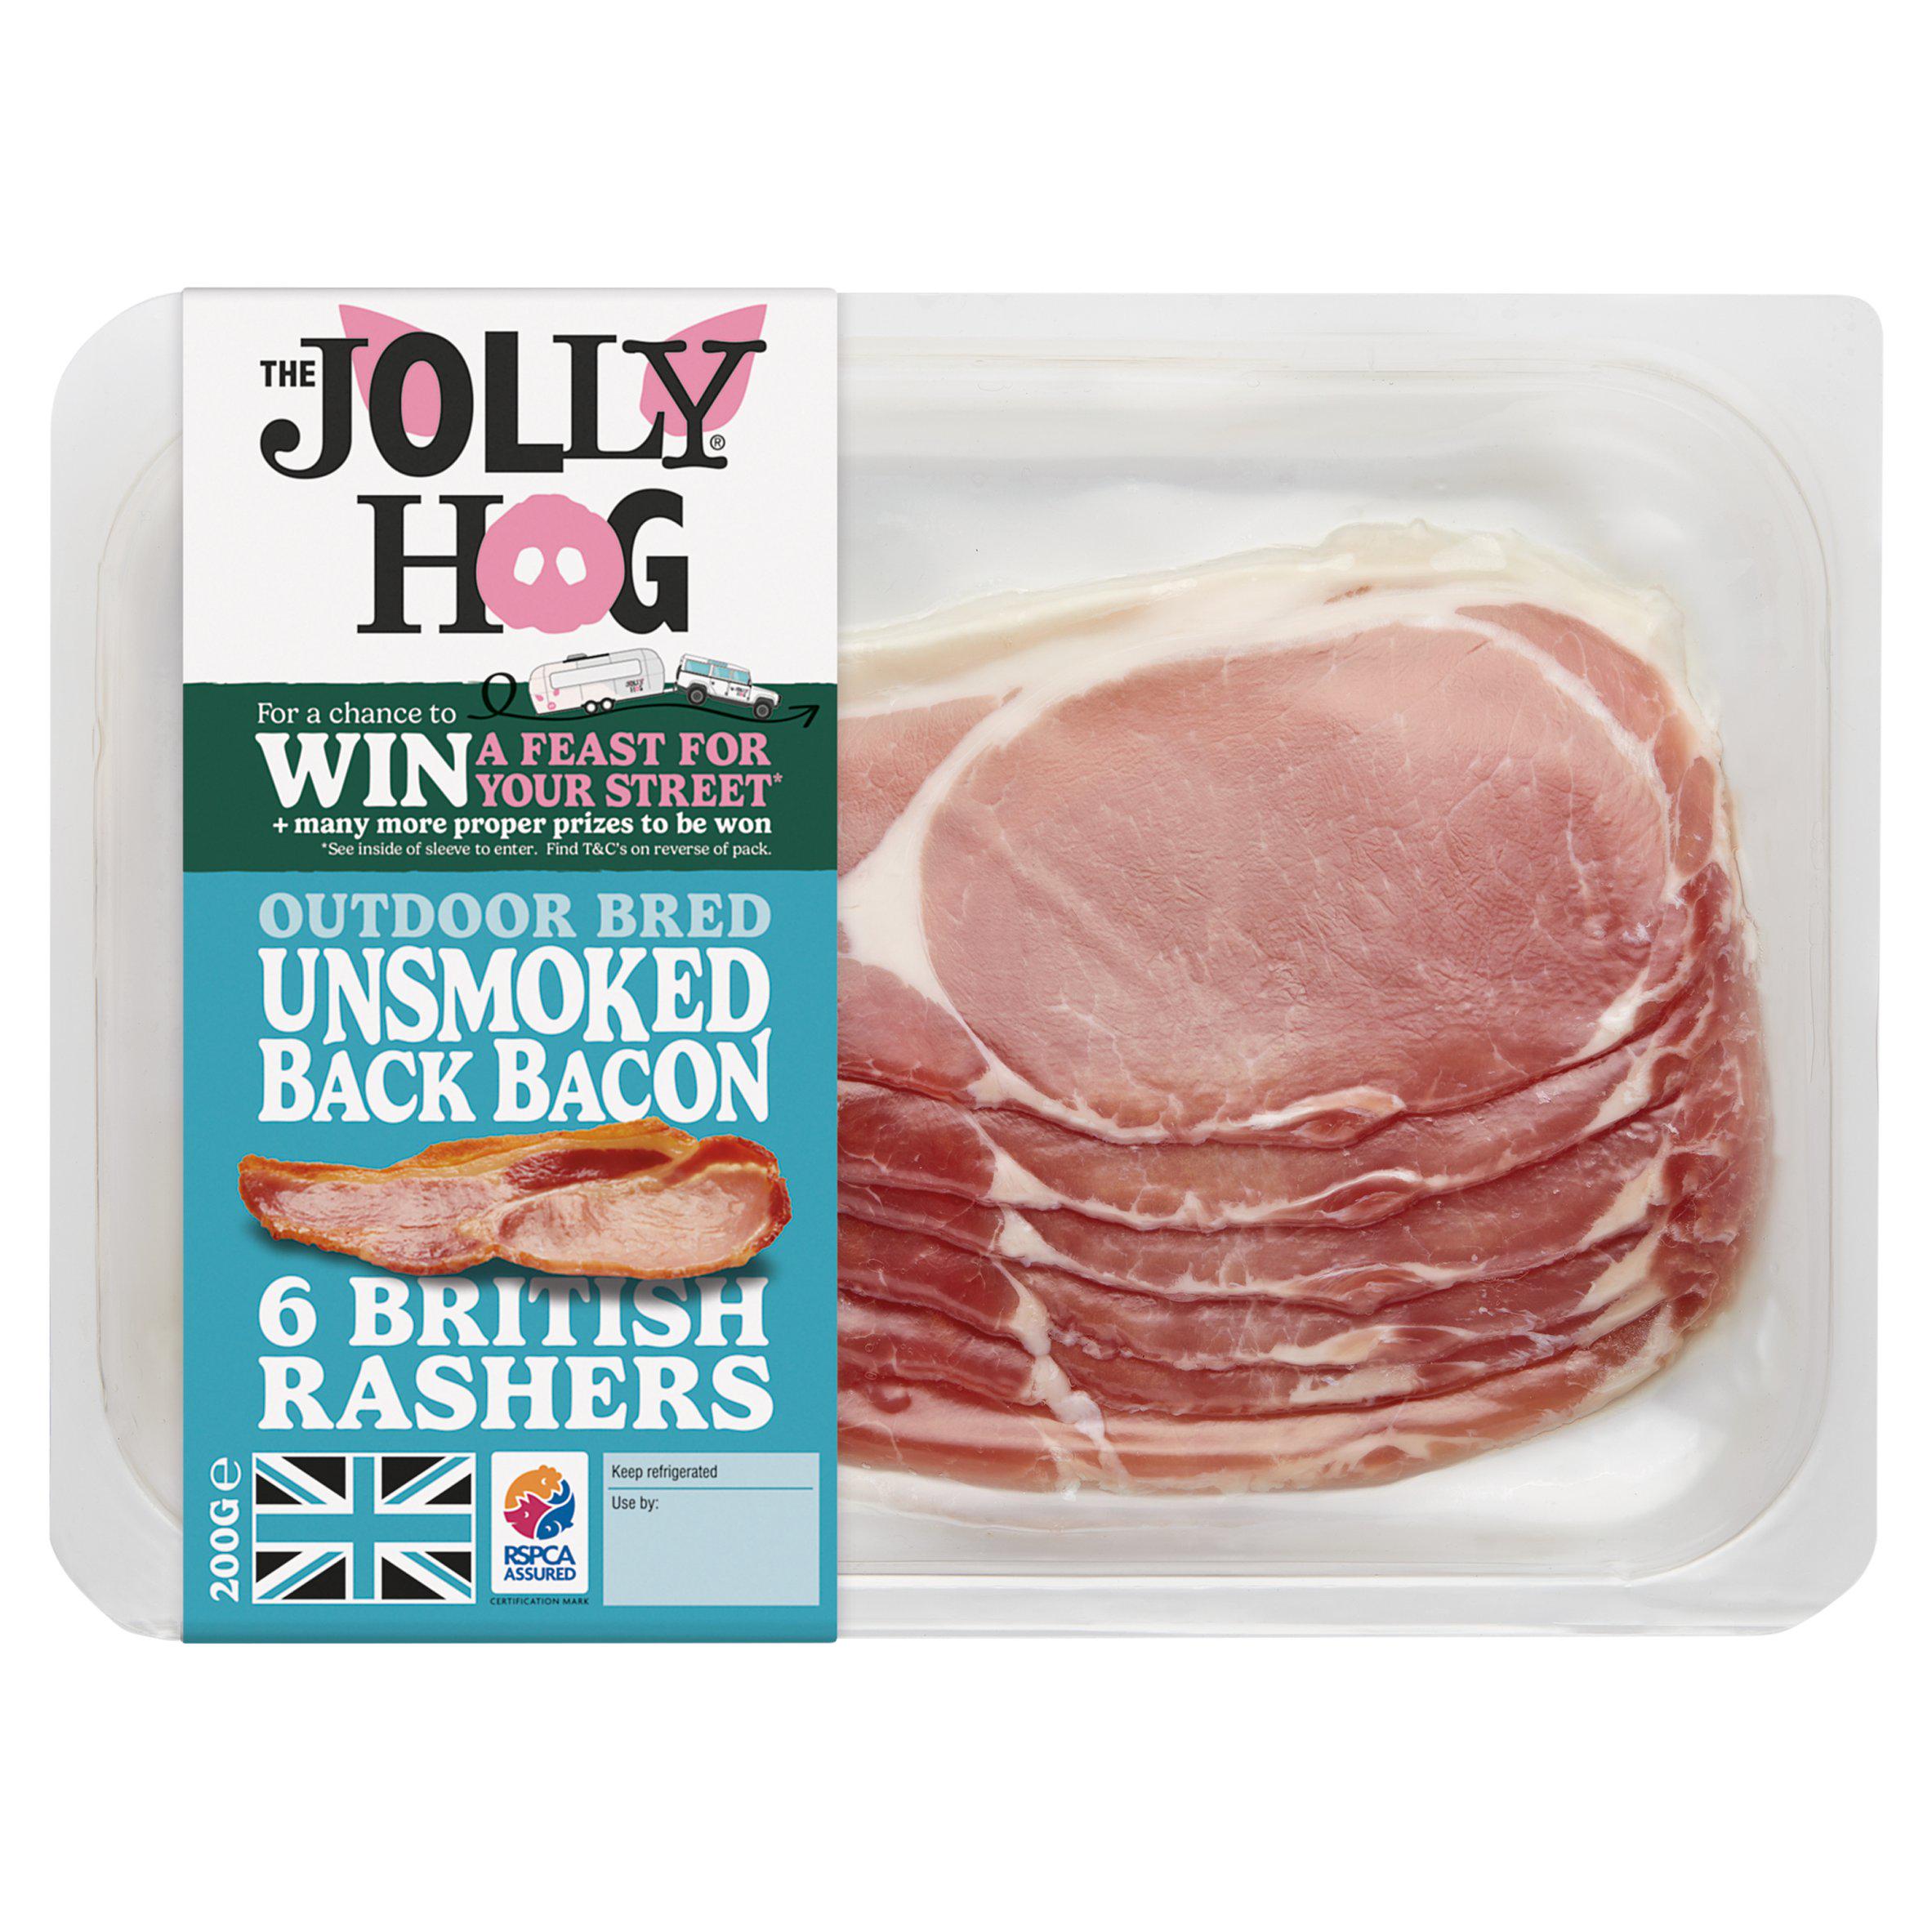 The Jolly Hog Outdoor Bred Unsmoked Back Bacon British Rashers x6 200g